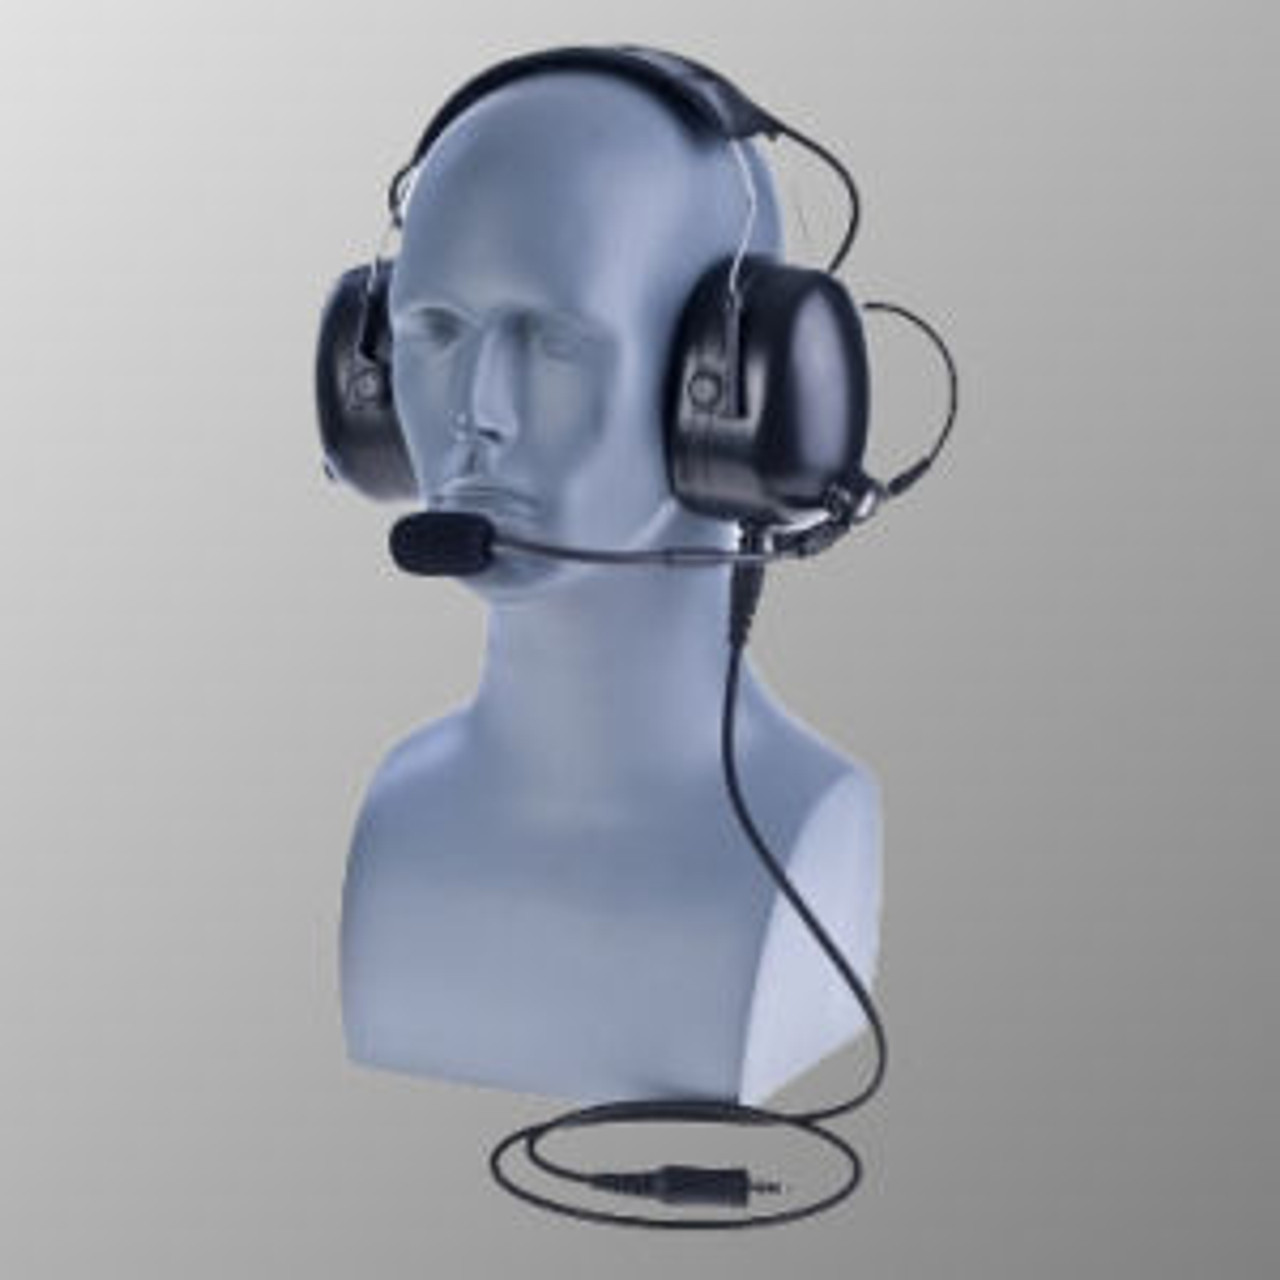 Motorola XPR6550 Over The Head Double Muff Headset